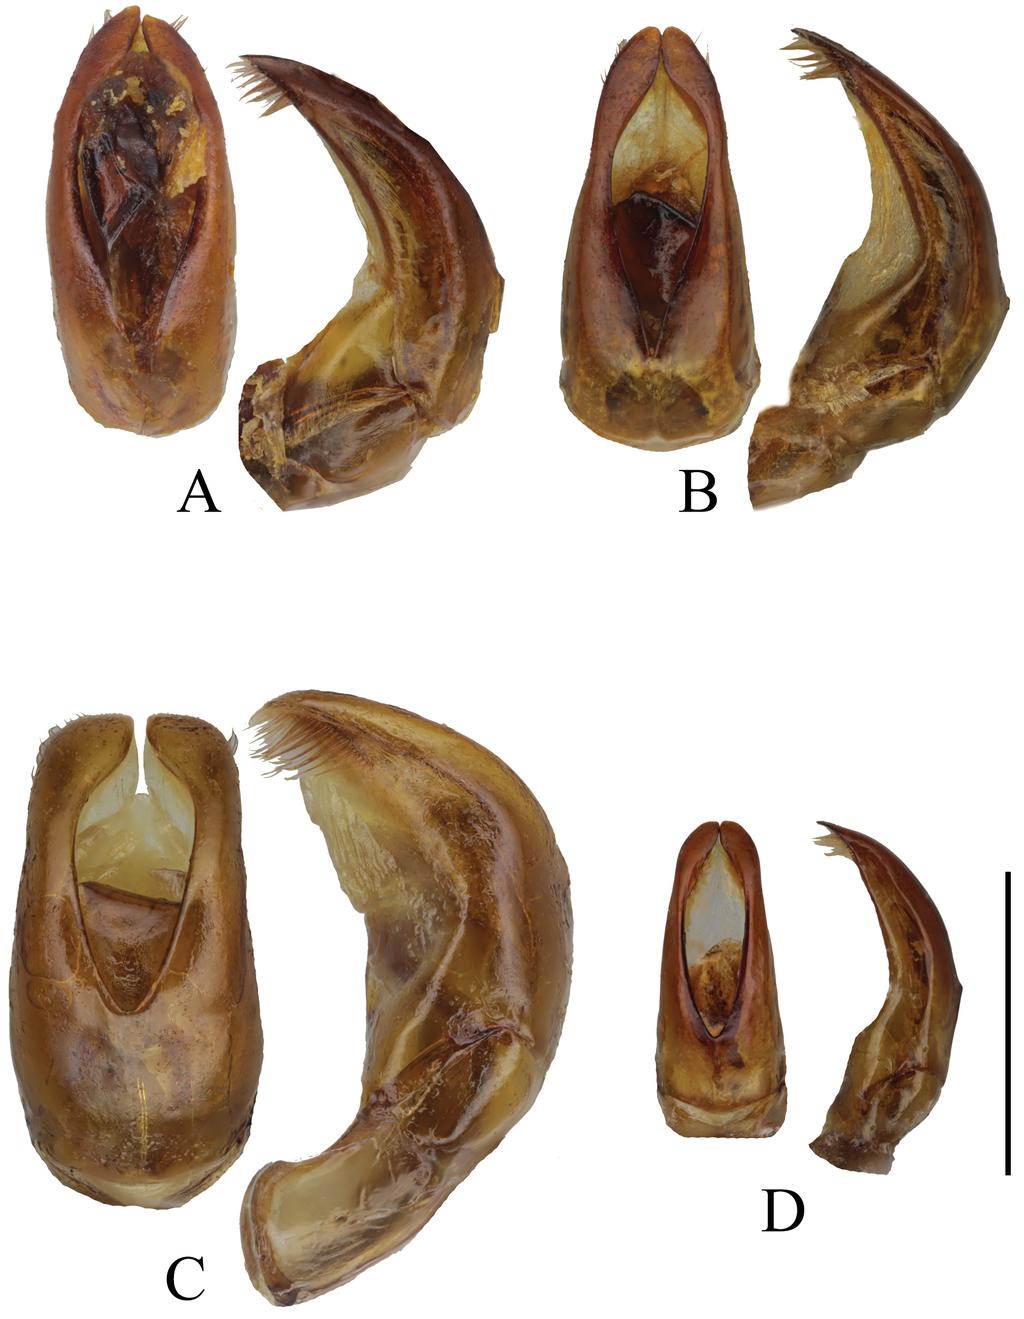 166 SEHNAL et al.: Revision of the Canuschiza insularis species group (Scarabaeidae) Figs 10A D.